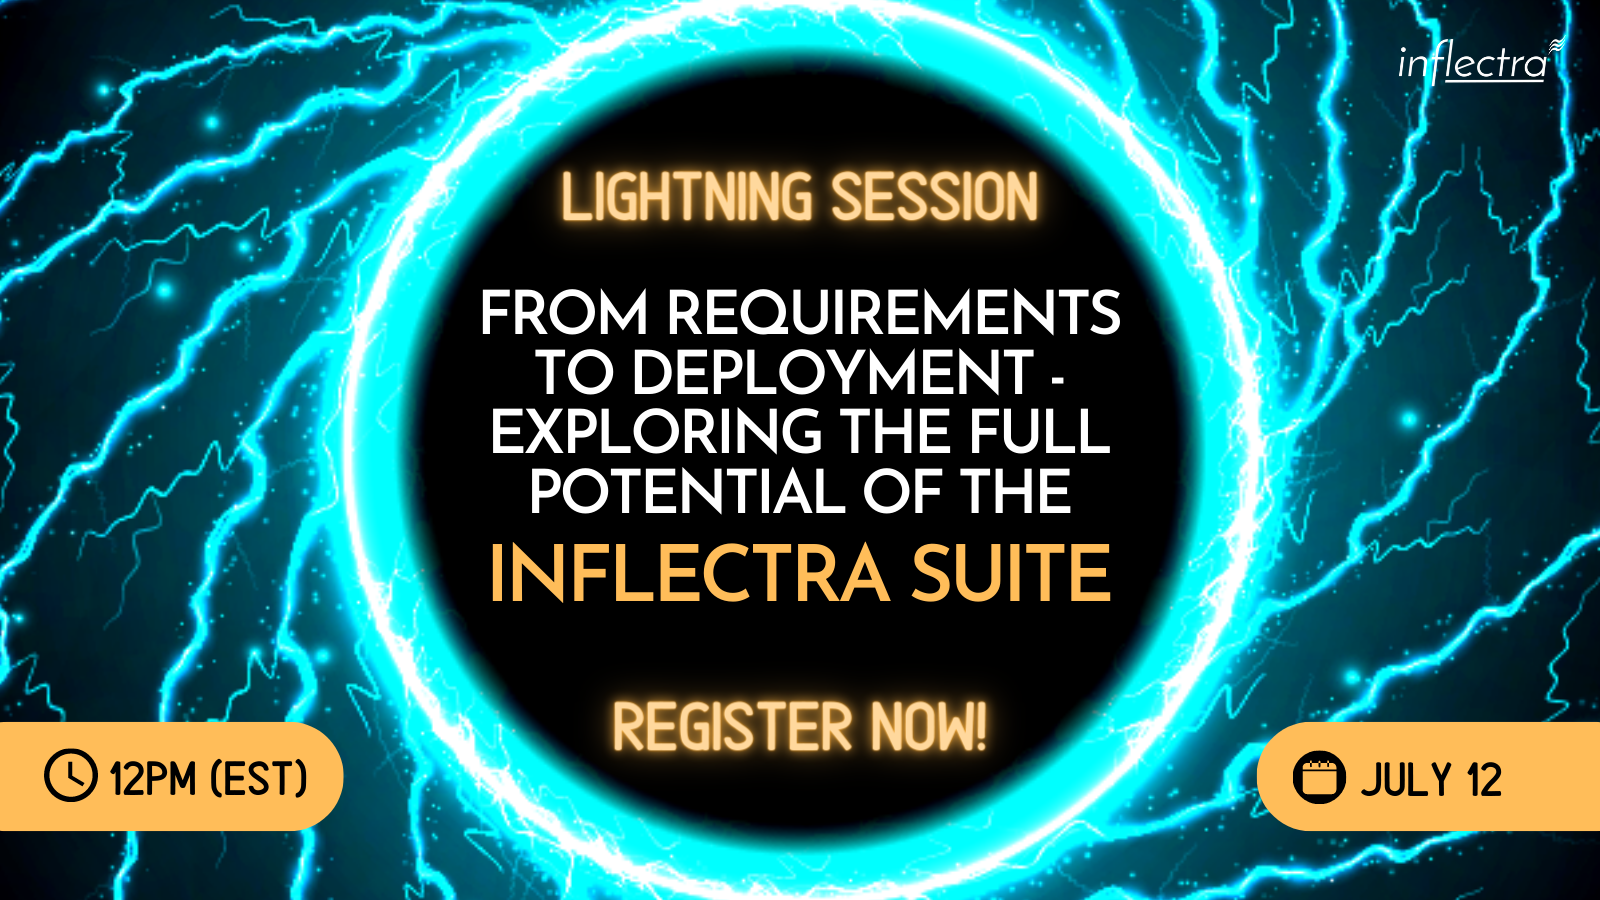 lightning-session-from-requirements-to-deployment-exploring-the-full-potential-of-inflectra-suite-image